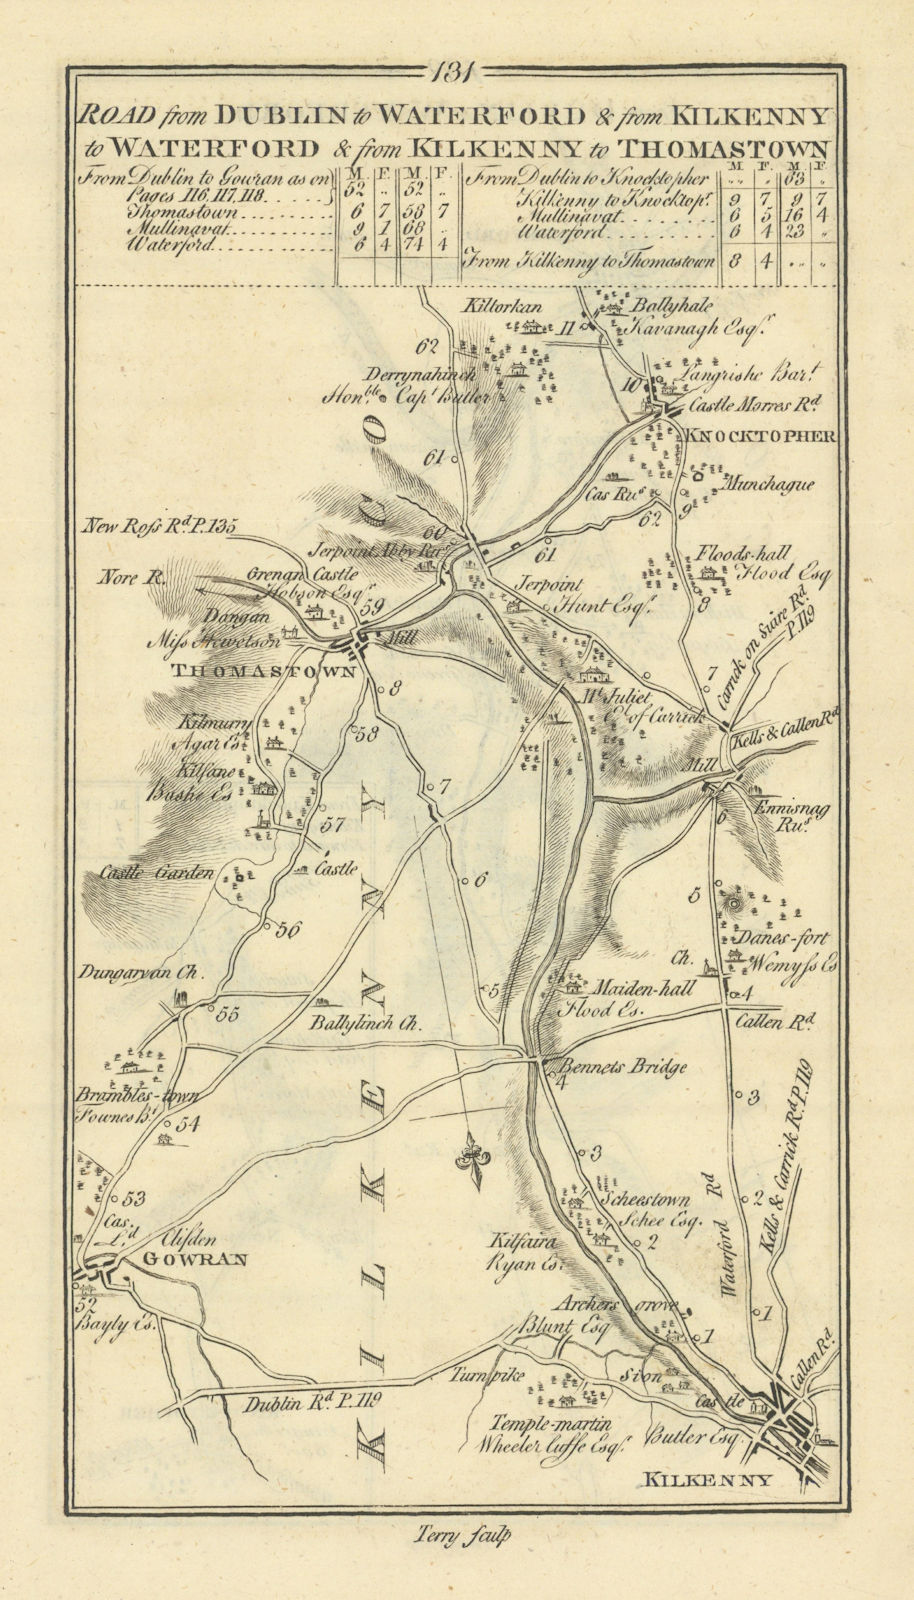 Associate Product #131 Kilkenny to Thomastown. Knocktopher Gowran. TAYLOR/SKINNER 1778 old map